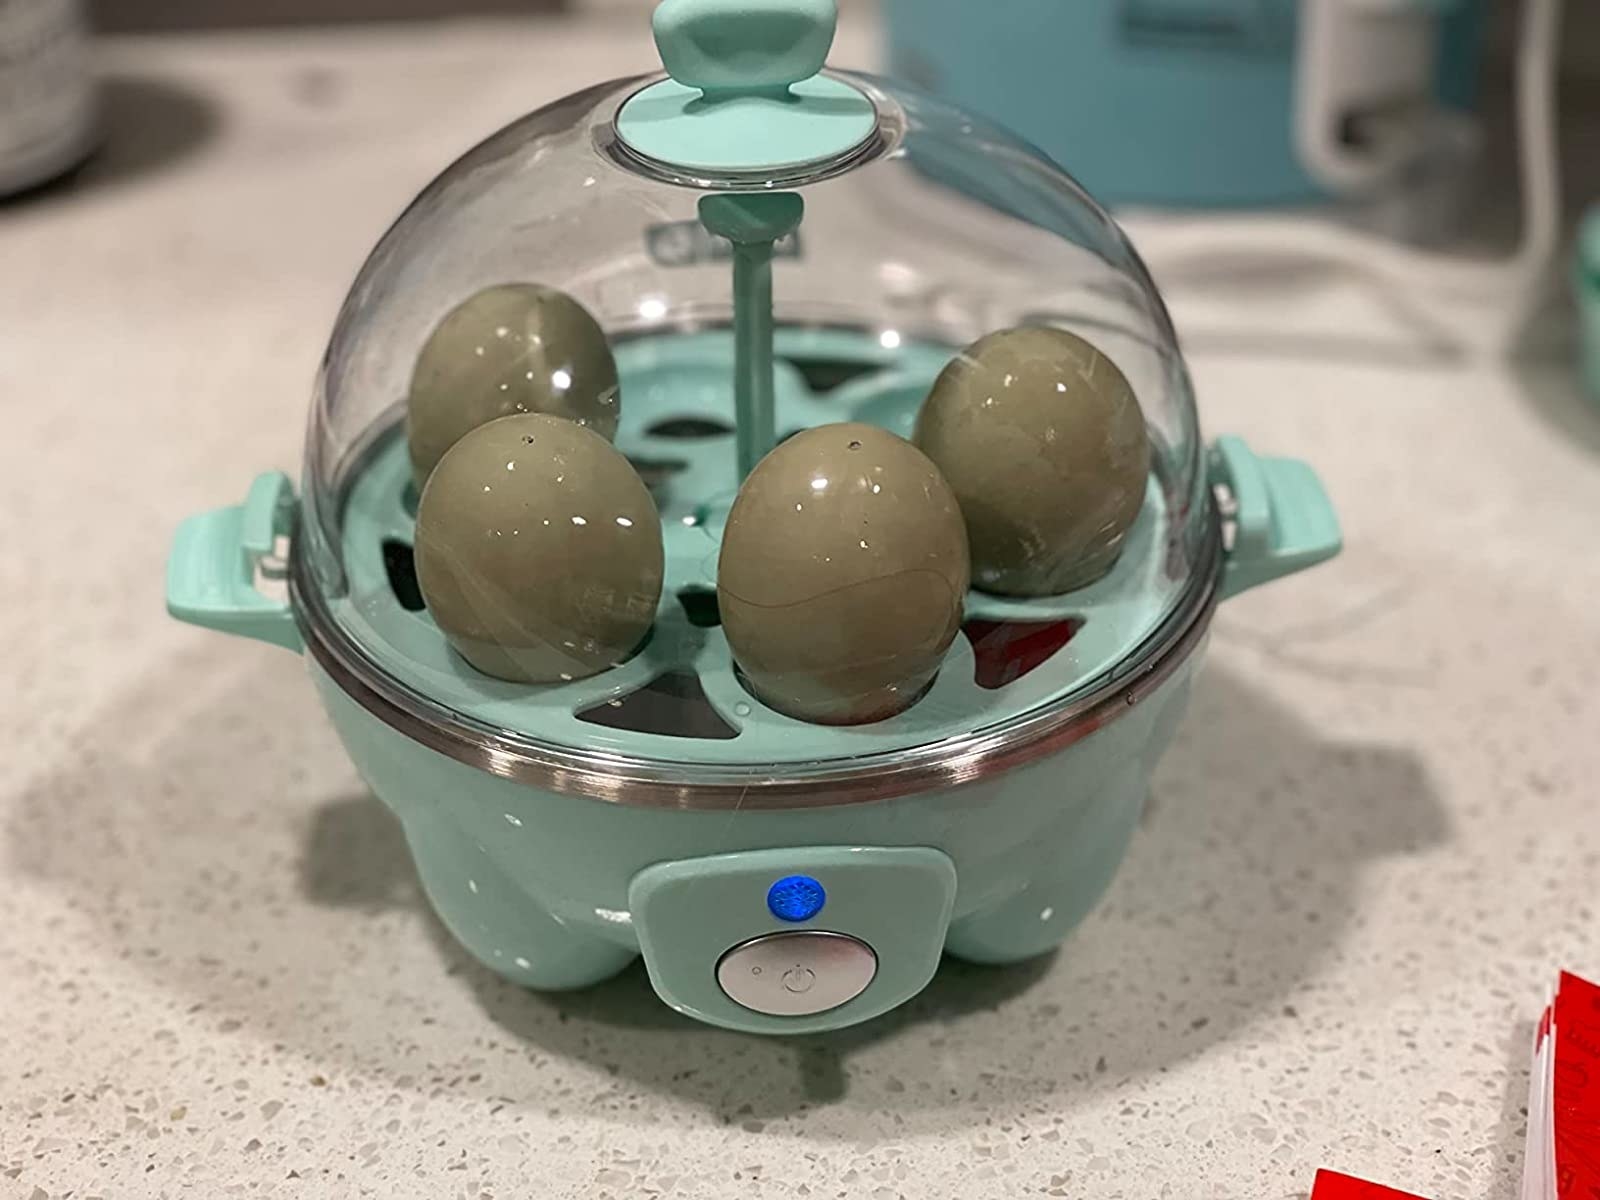 Reviewer image of eggs in blue egg cooker